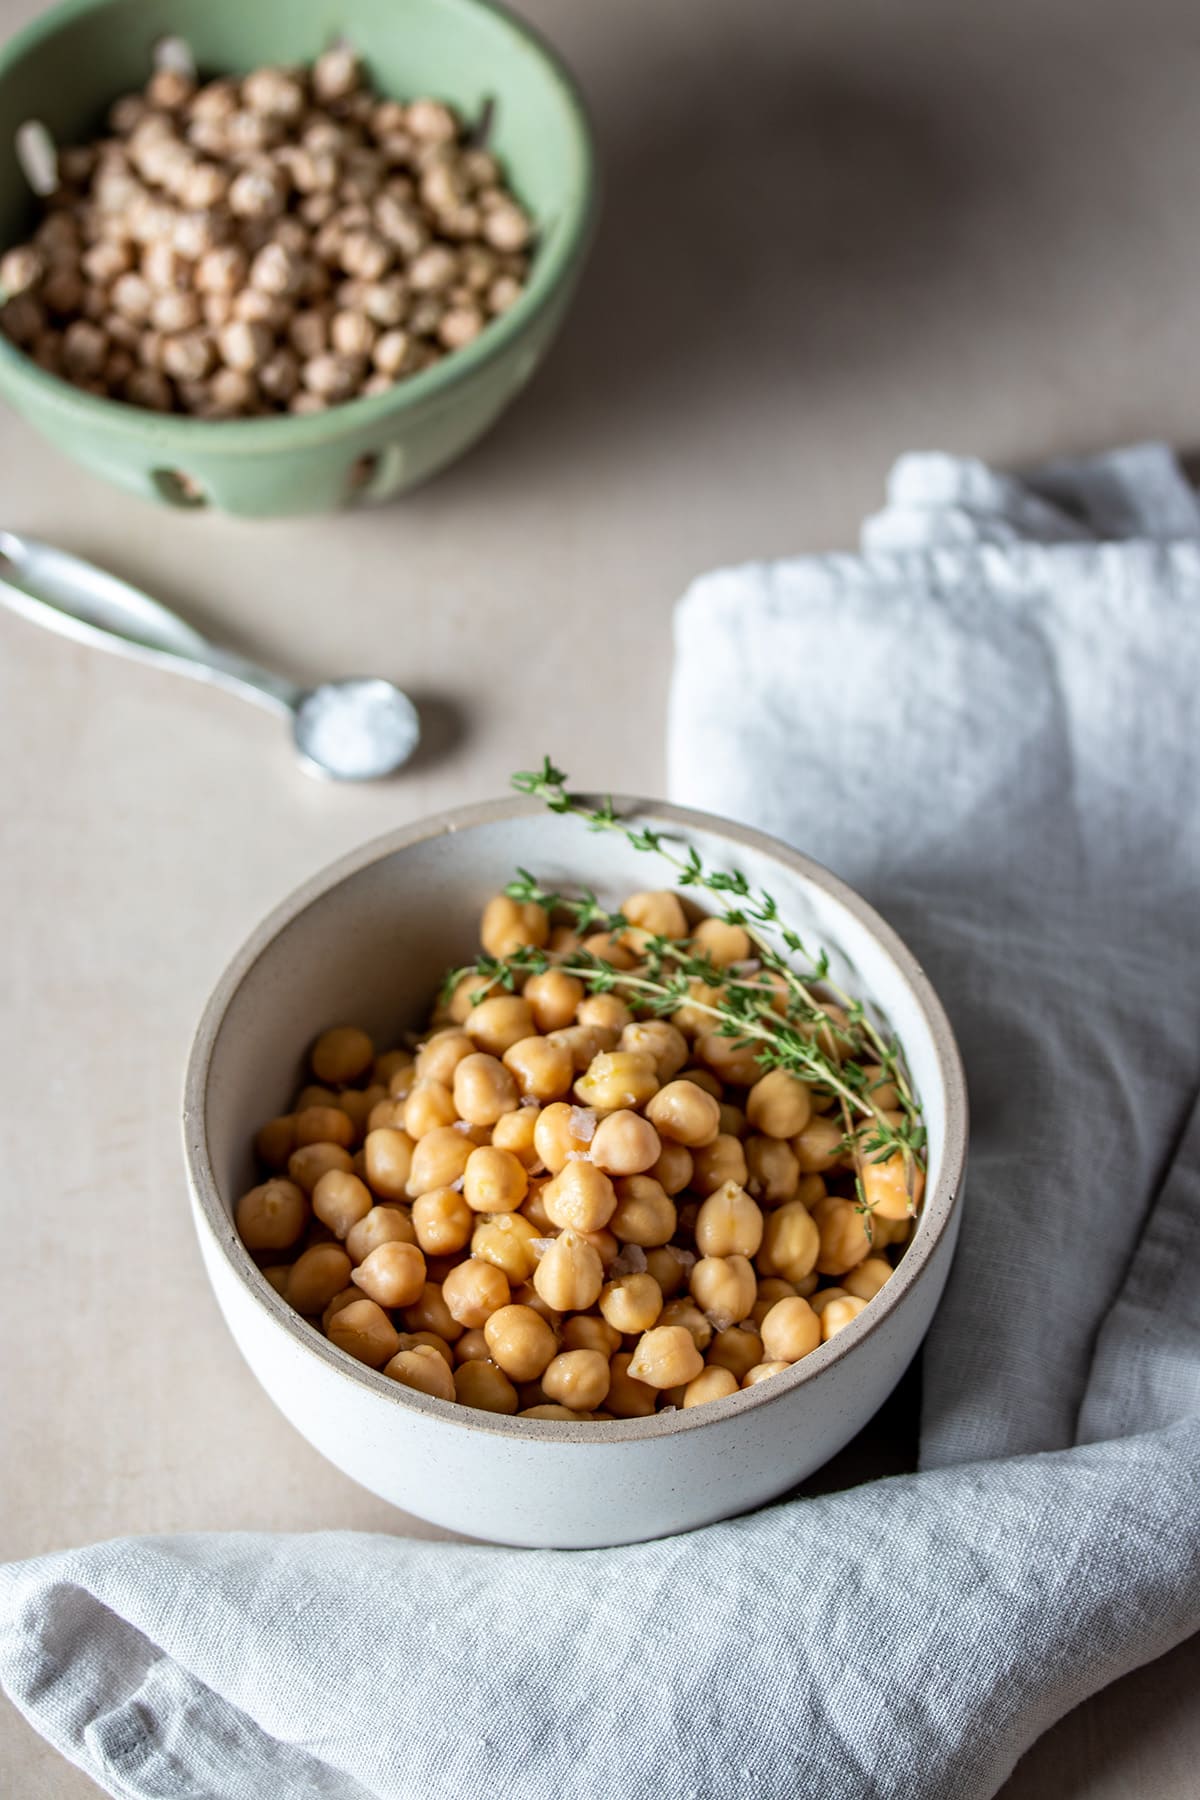 A white bowl filled with chickpeas and thyme sprigs on a tan surface in front of a green strainer with dry chickpeas.